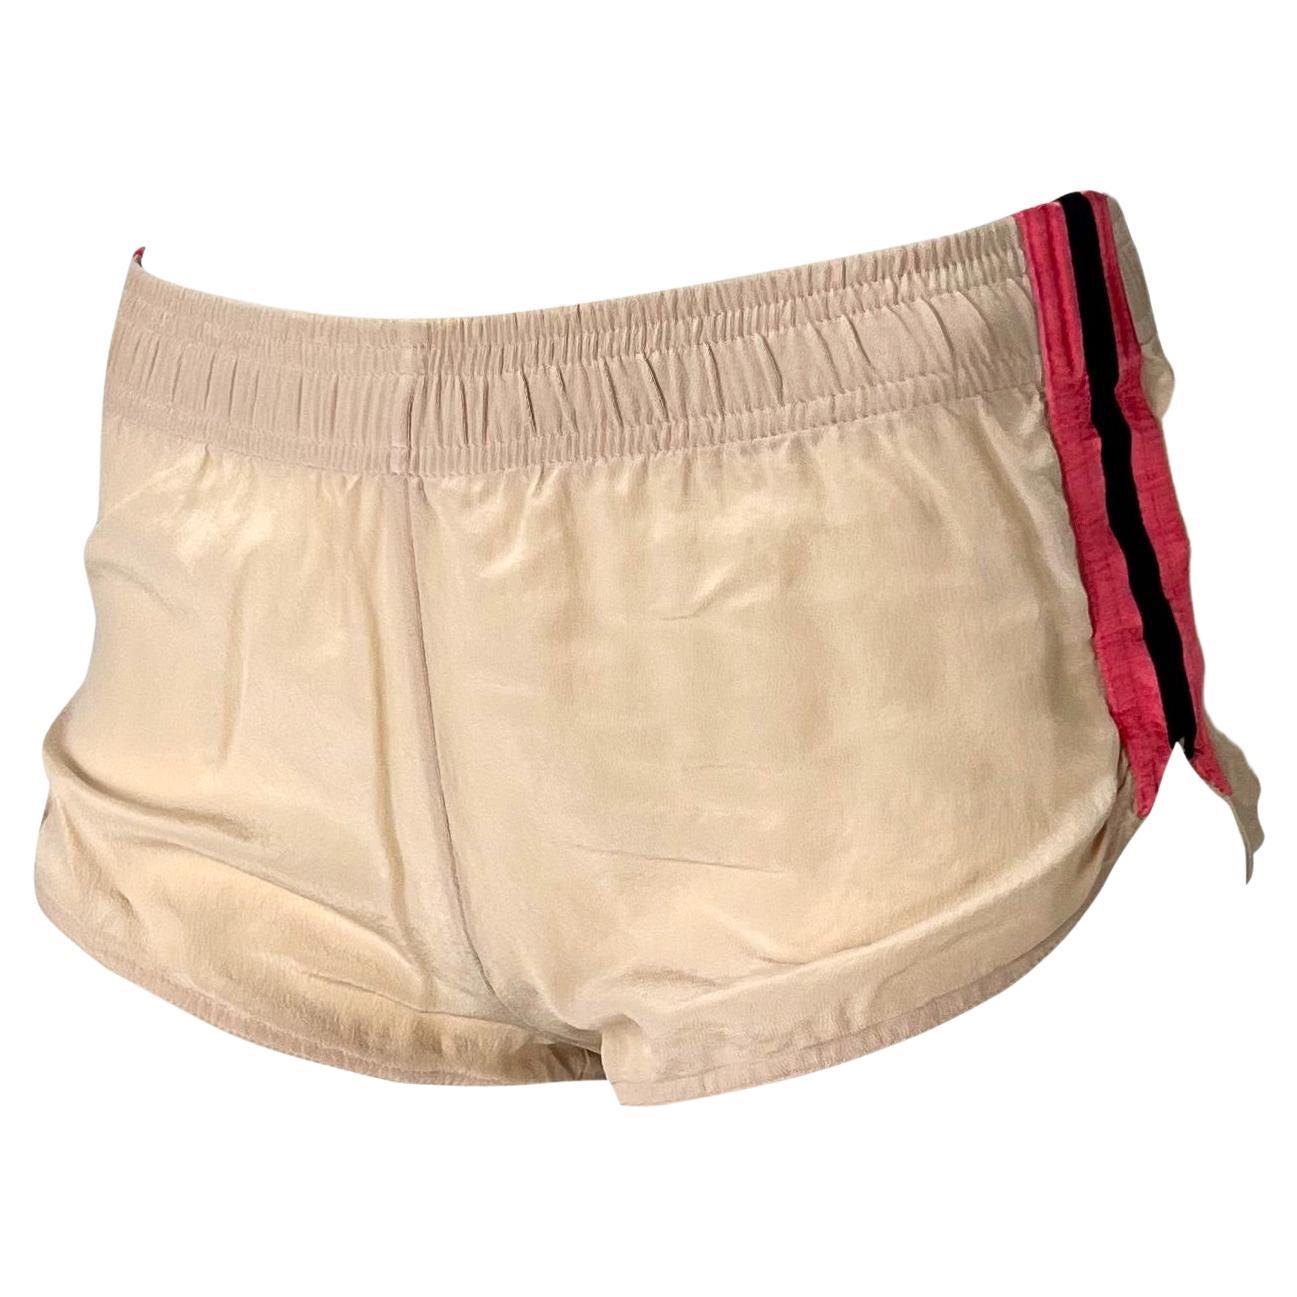 S/S 2004 Gucci by Tom Ford Runway Beige Silk Pink Stripe Mini Shorts For Sale